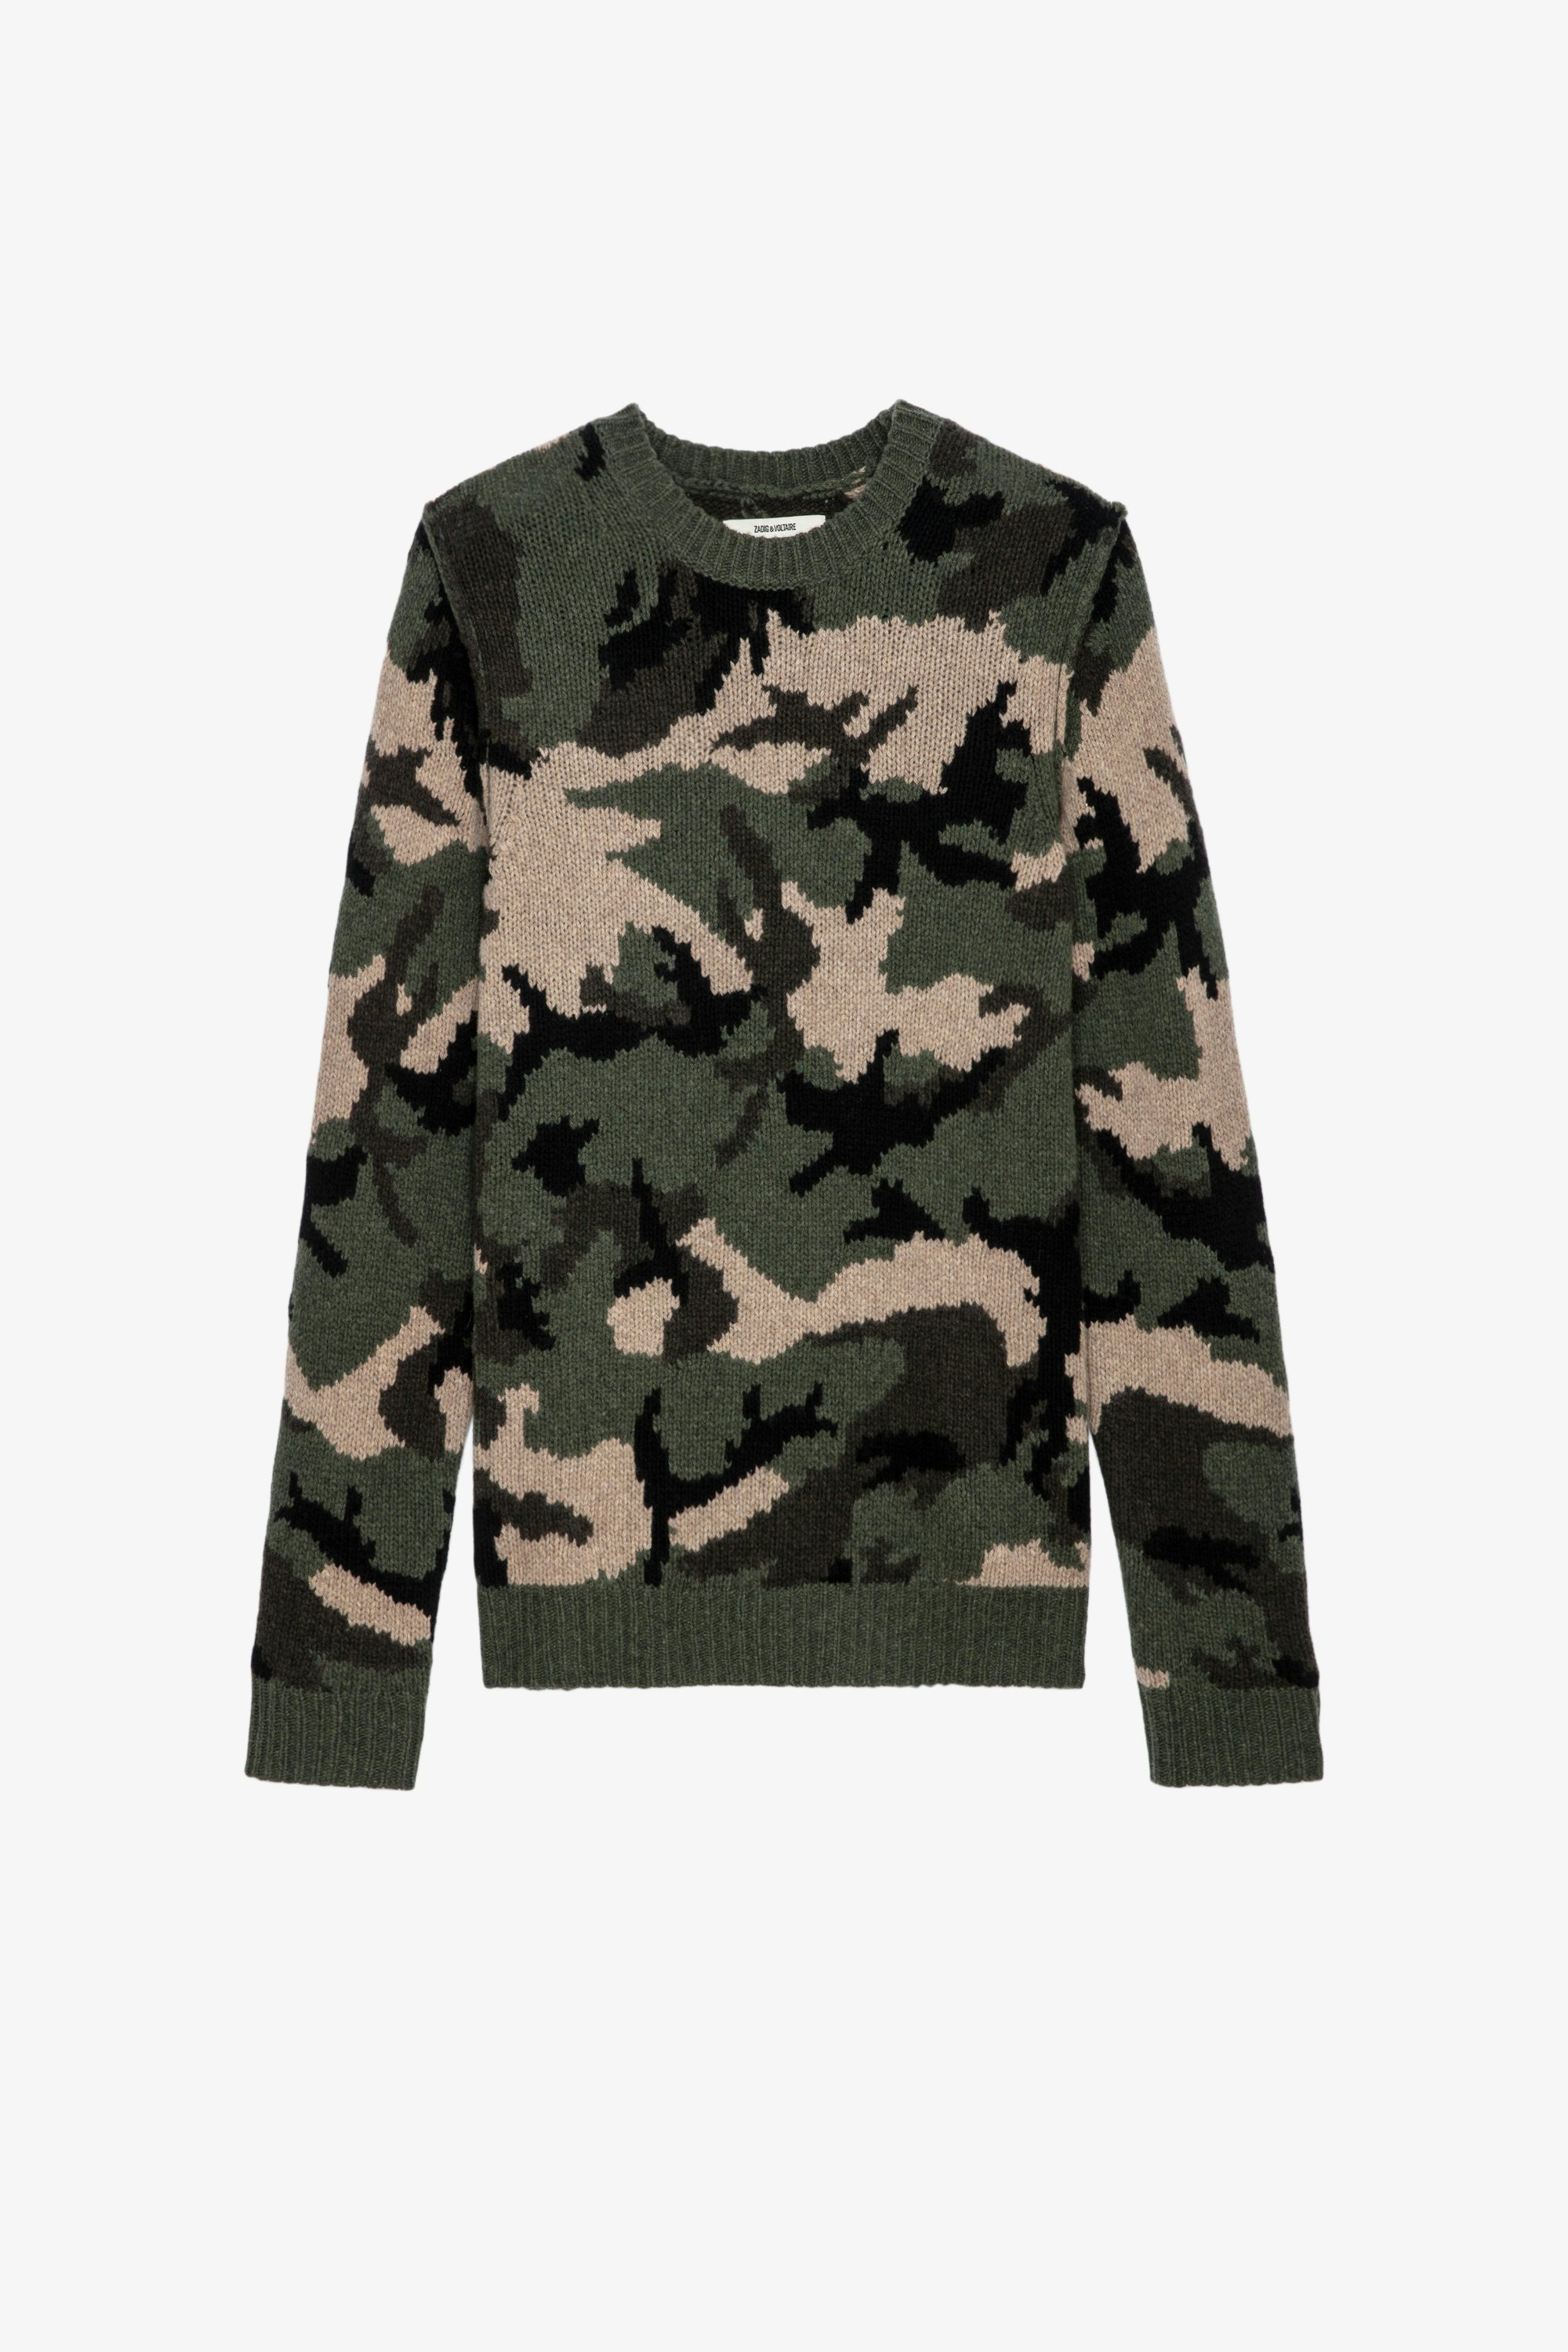 Kennedy ニット Men’s khaki camouflage-print wool jumper with “Art is truth” slogan on the back